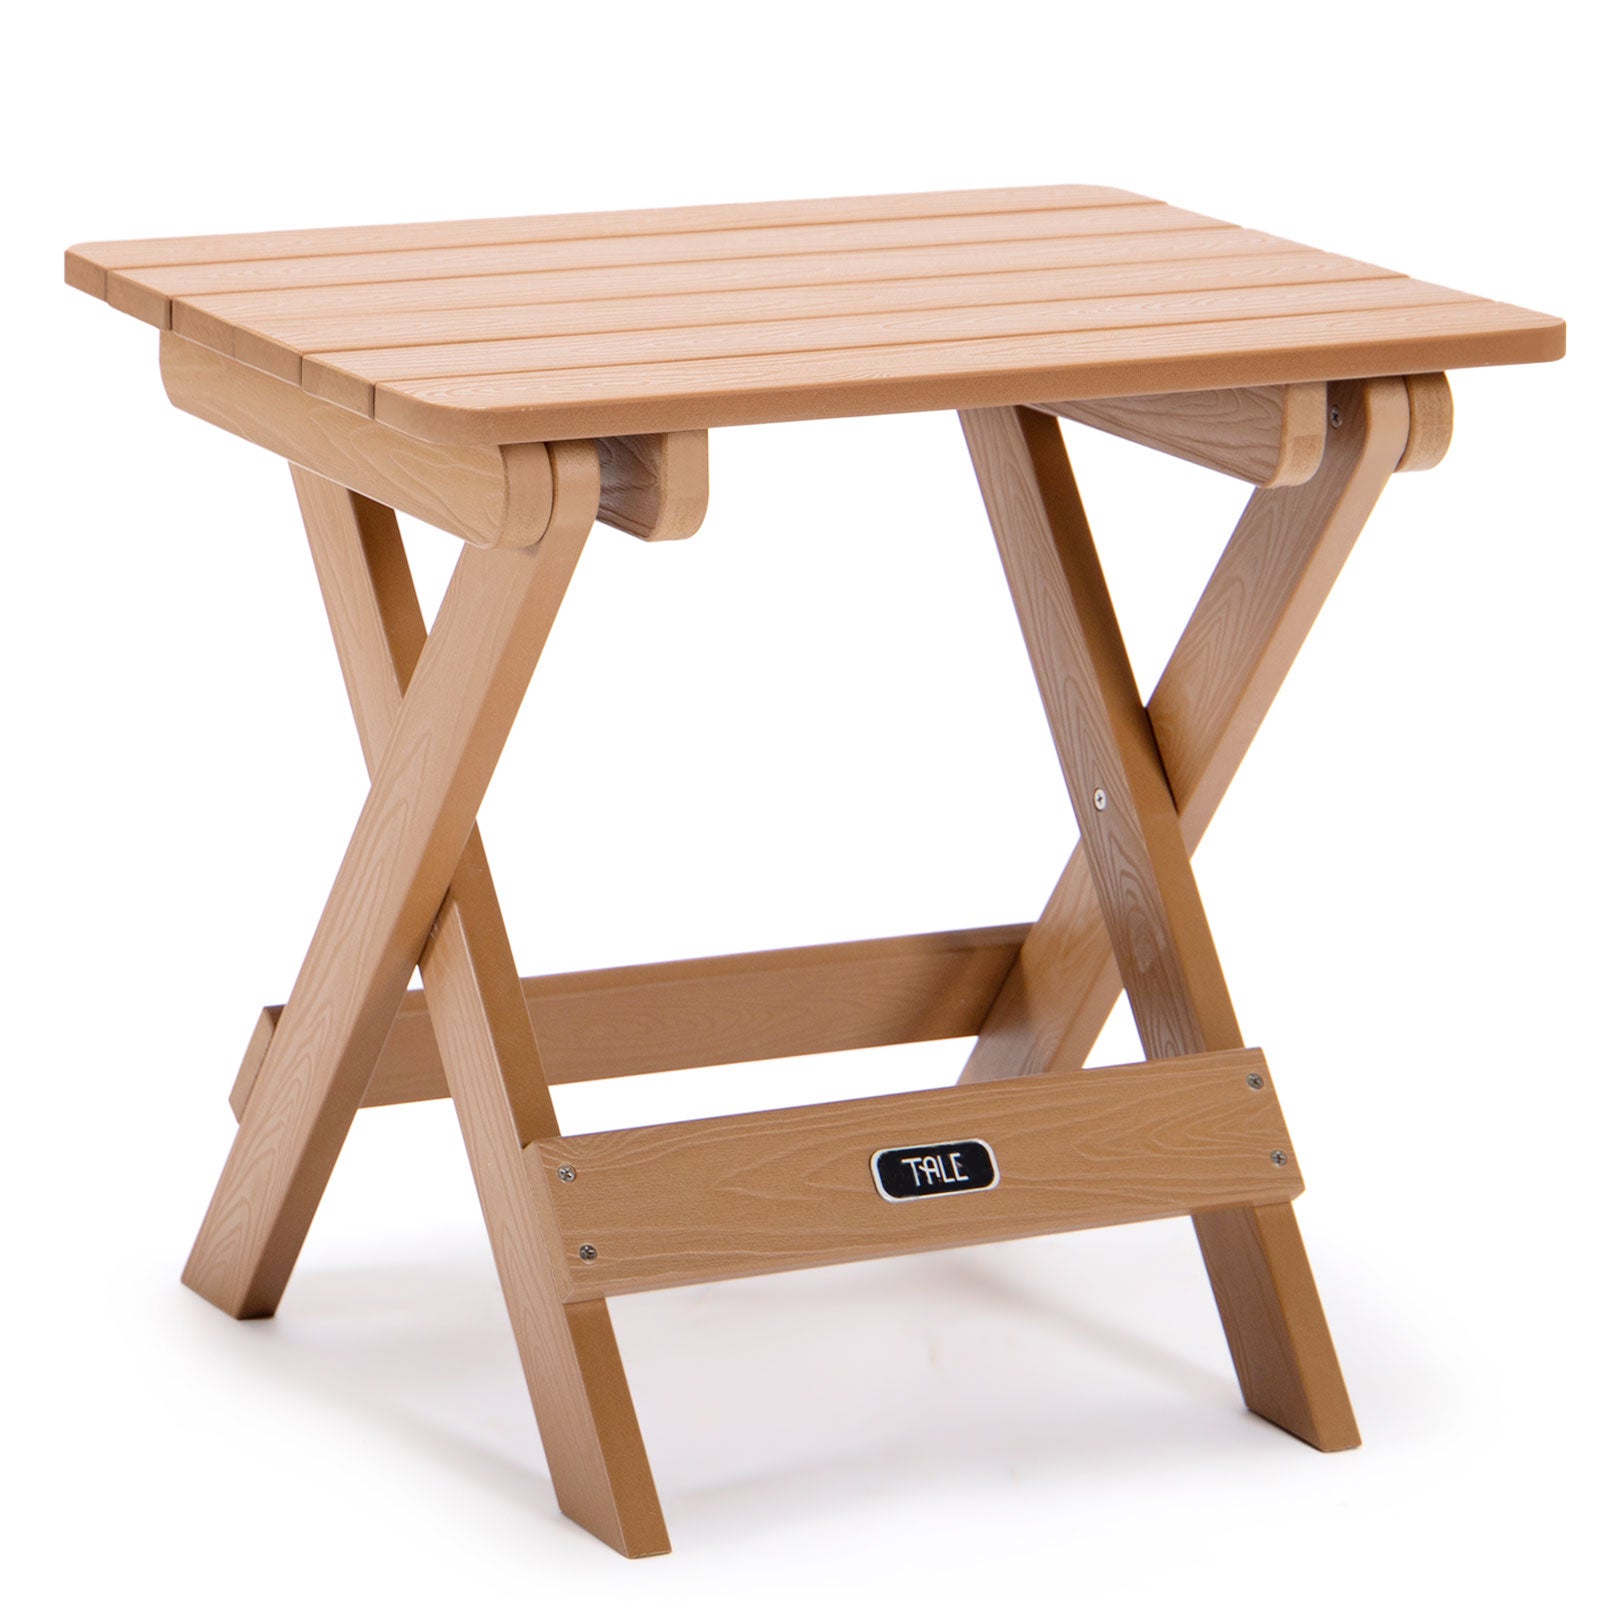 Adirondack Table/Outdoor Table/Outdoor Furniture